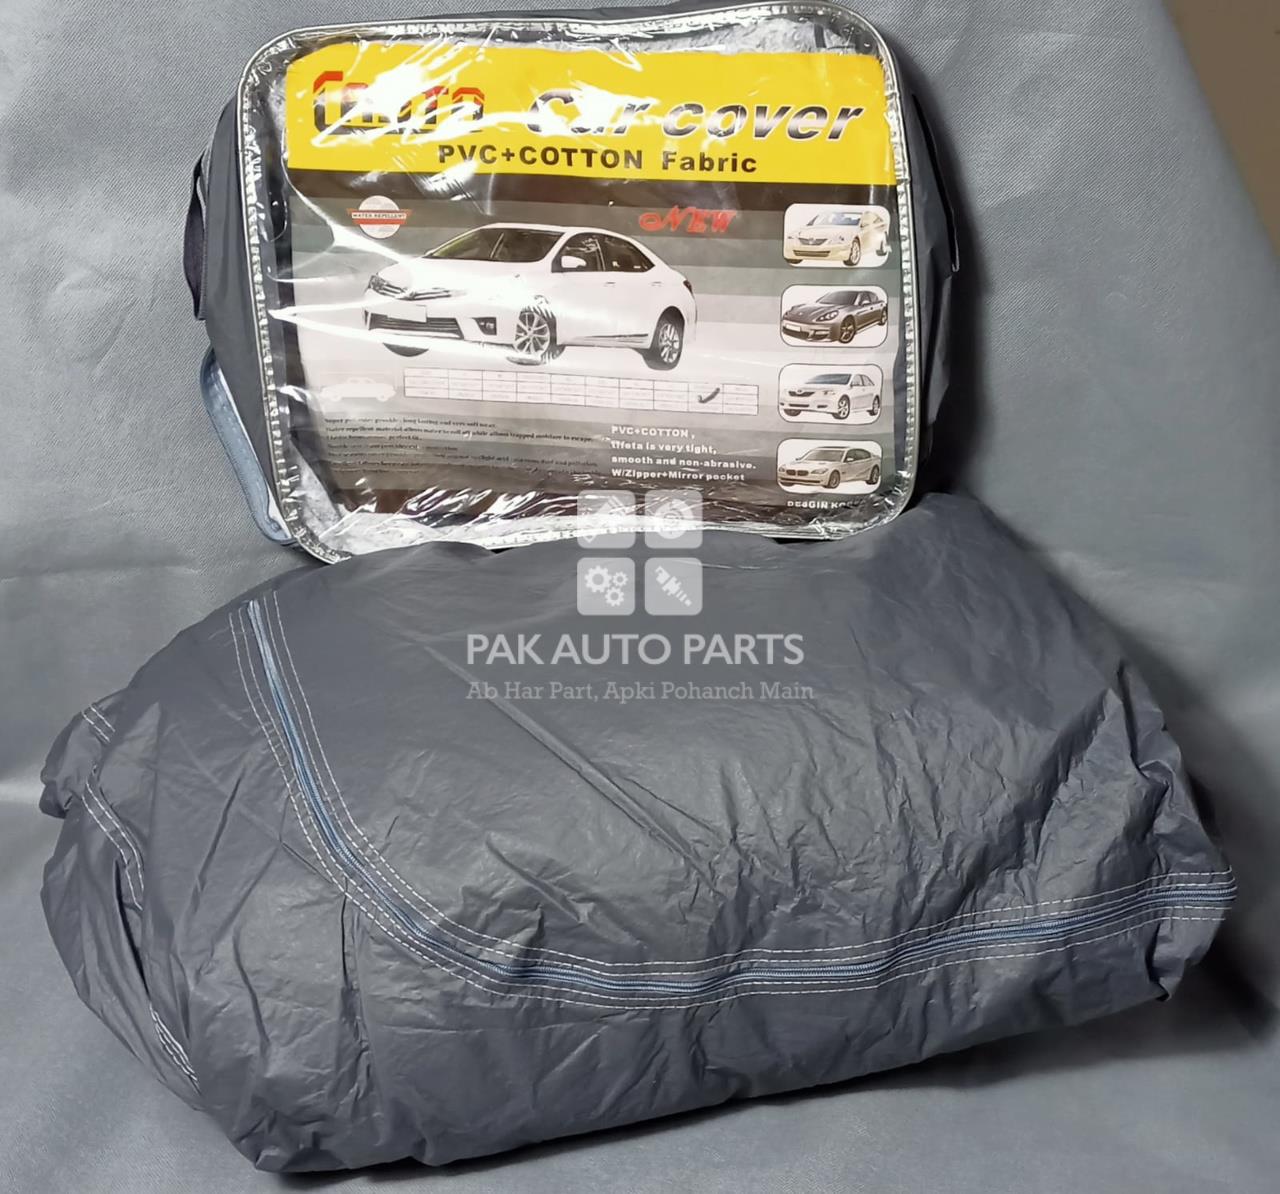 Picture of Hyundai Tucson Top Cover PVC Cotton Coted